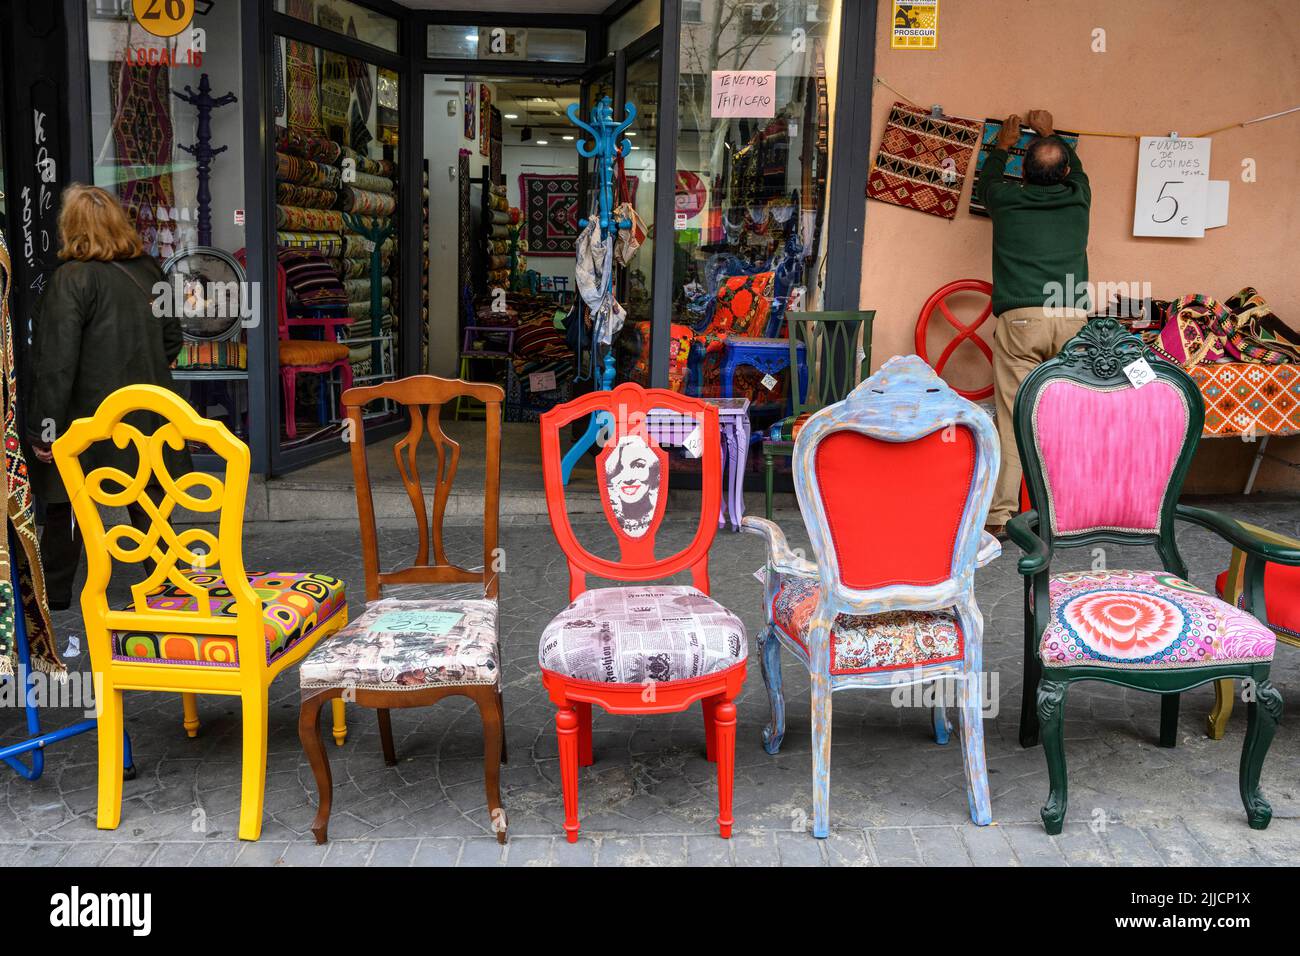 A selection of restored chairs on sale in the Rastro flea market around the Plaza de Cascorro between La Latina and Embajadores,  Madrid, Spain. Stock Photo